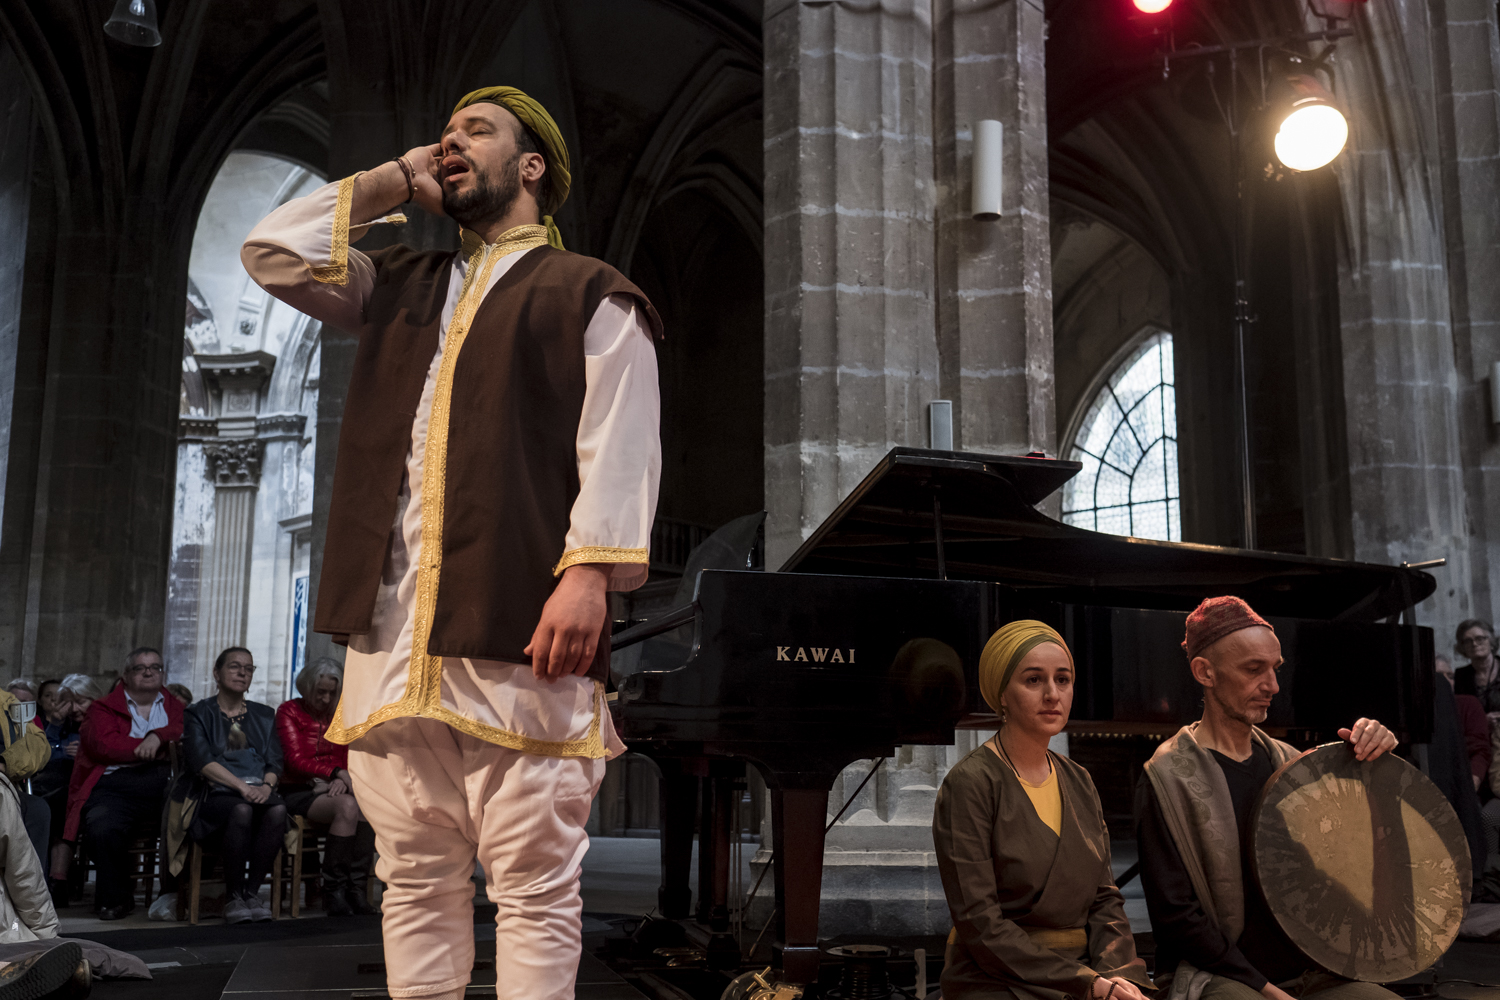 The Dervish Spirit Ensemble performs in front of the audience in Saint Merry on 9 June 2019 (photo: Jan Schmidt-Whitley / Le Pictorium)